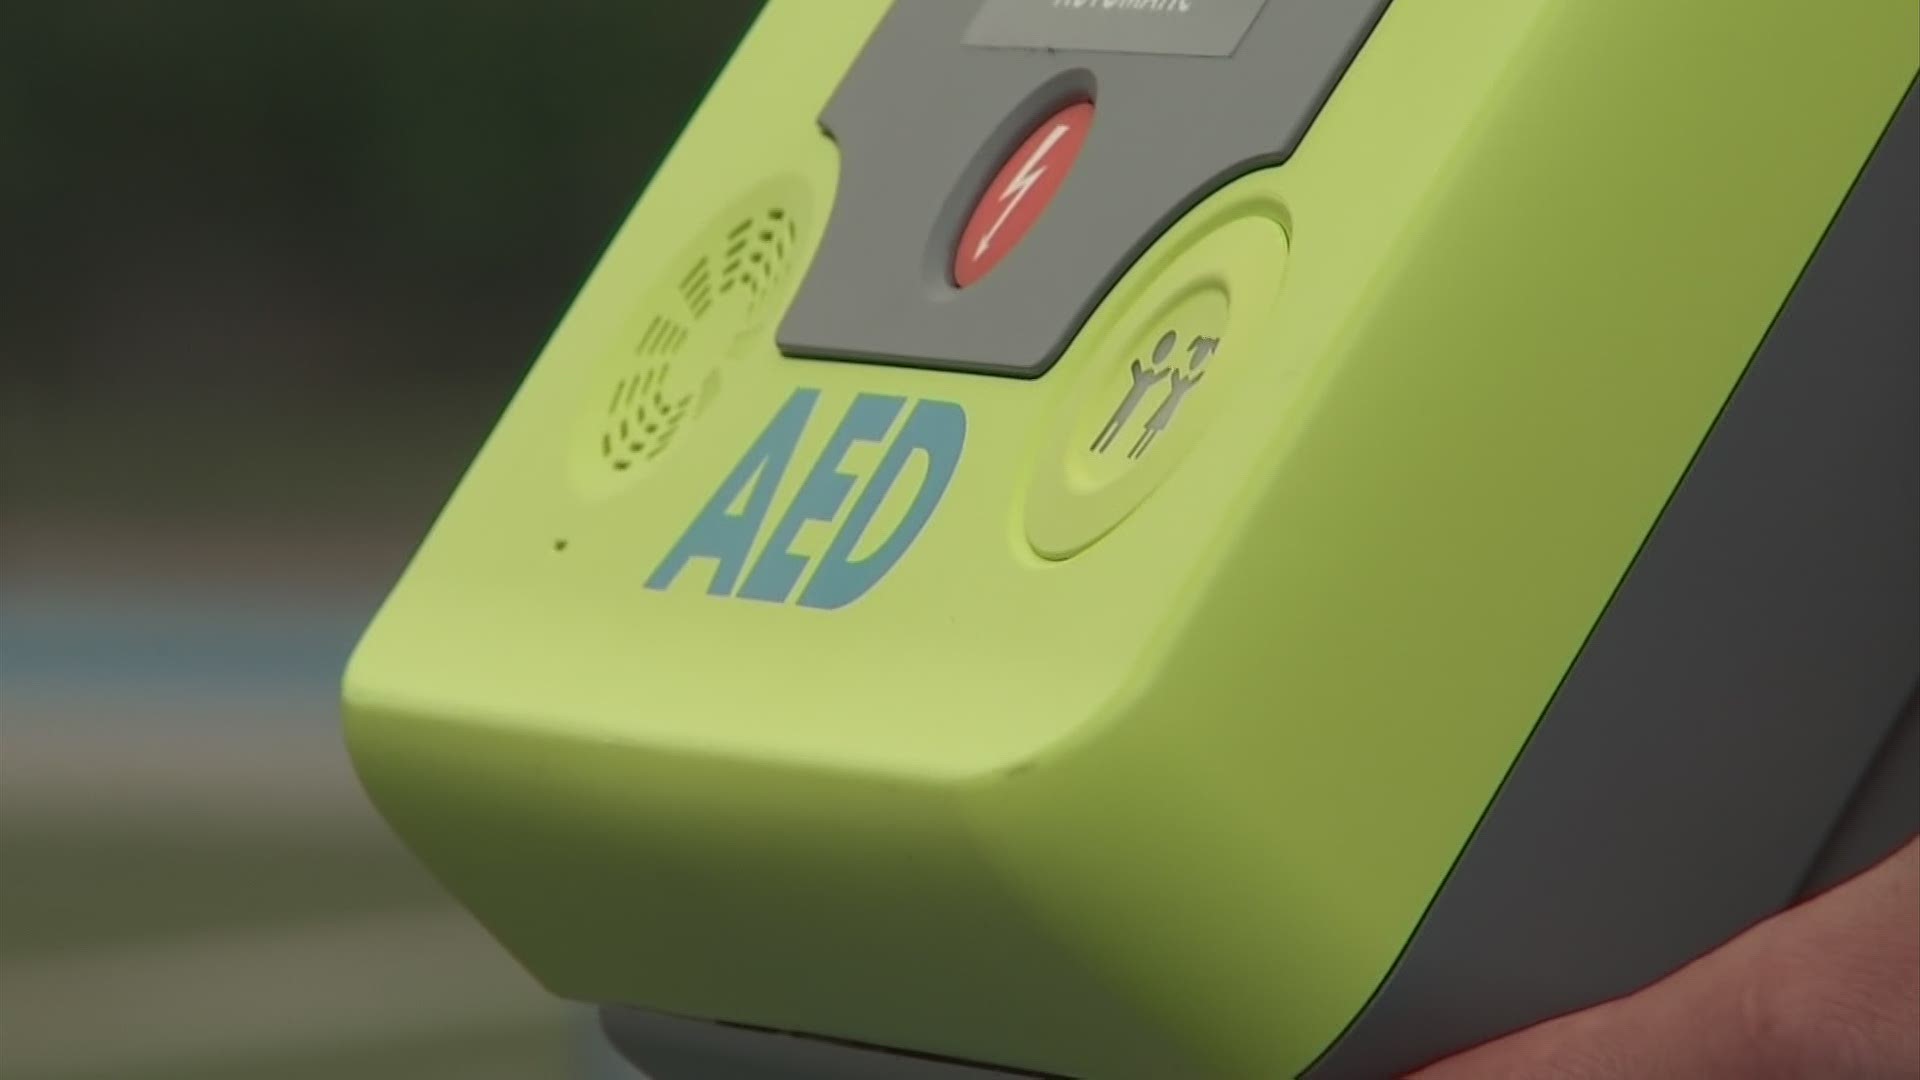 In Ohio, educators are required to be instructed on how to use defibrillators, but there are no laws that mandate schools have them on-site, according to a lawmaker.